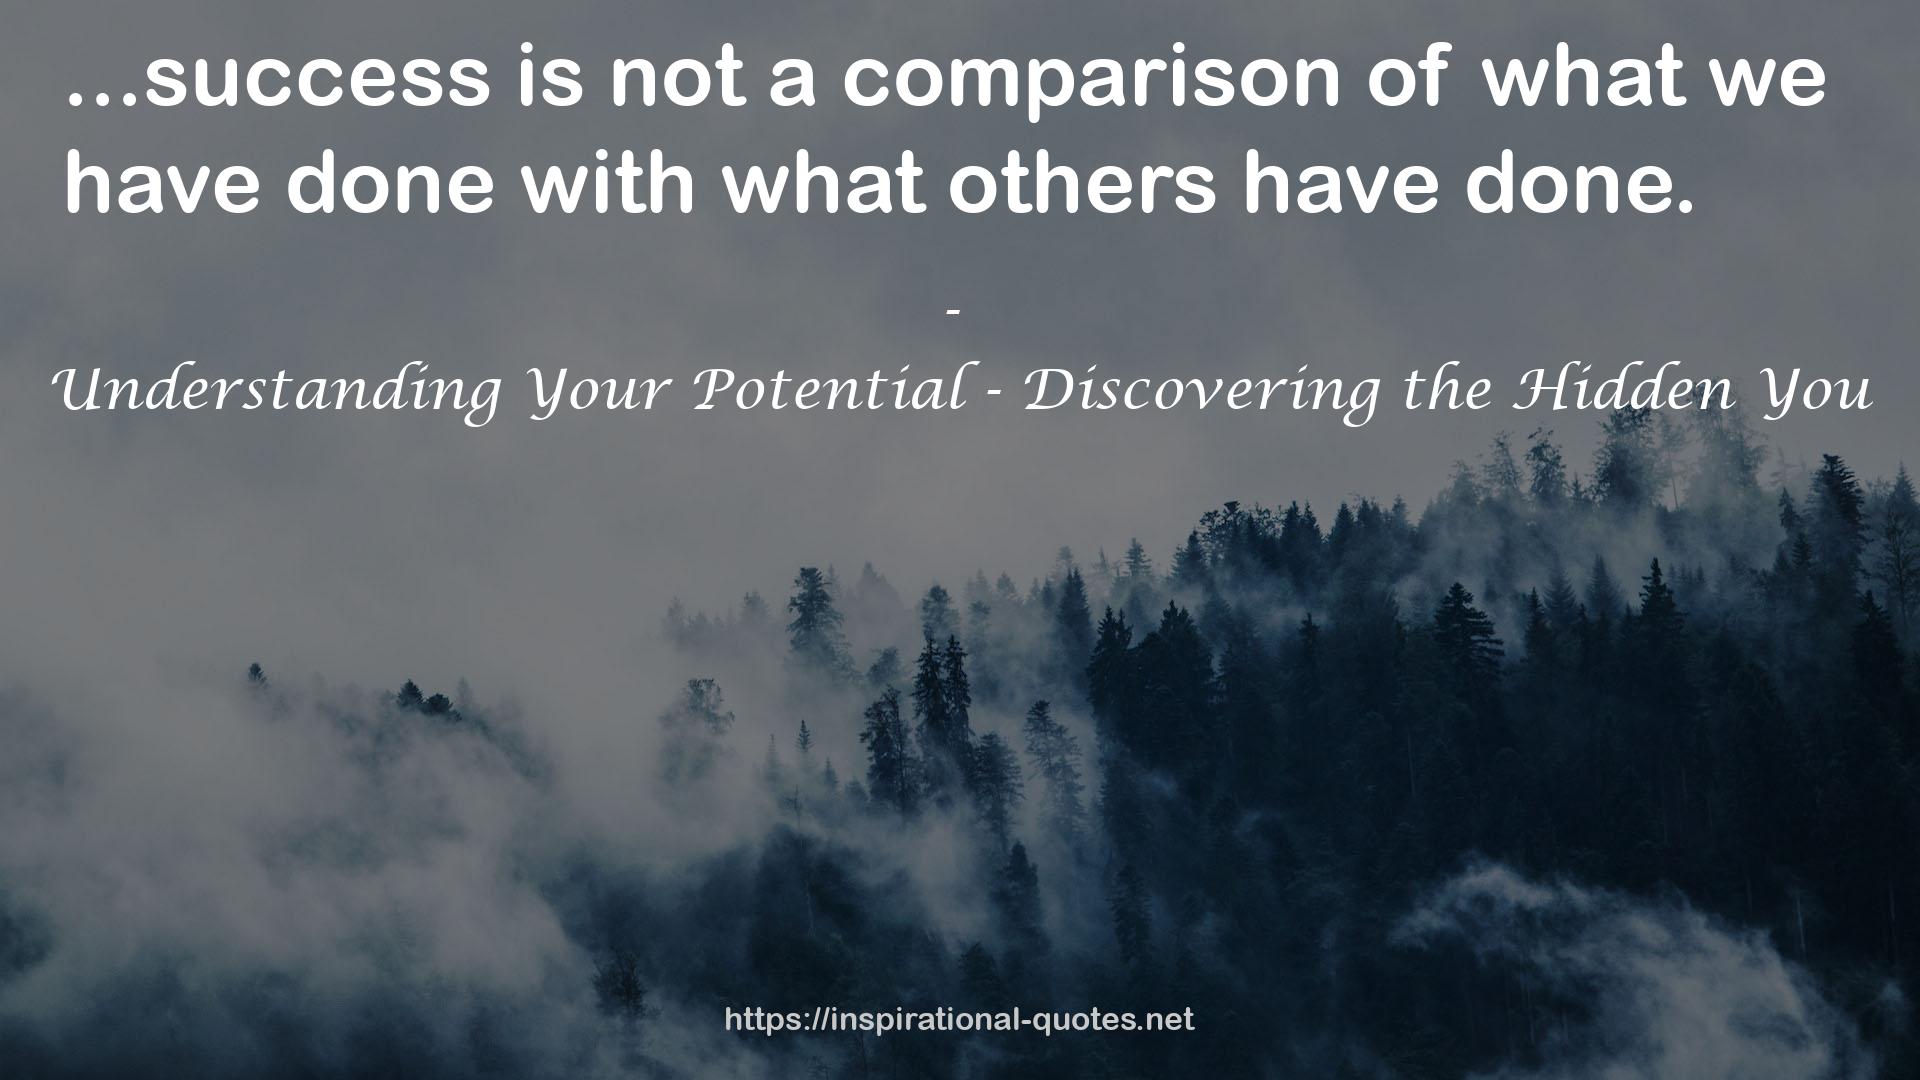 Understanding Your Potential - Discovering the Hidden You QUOTES